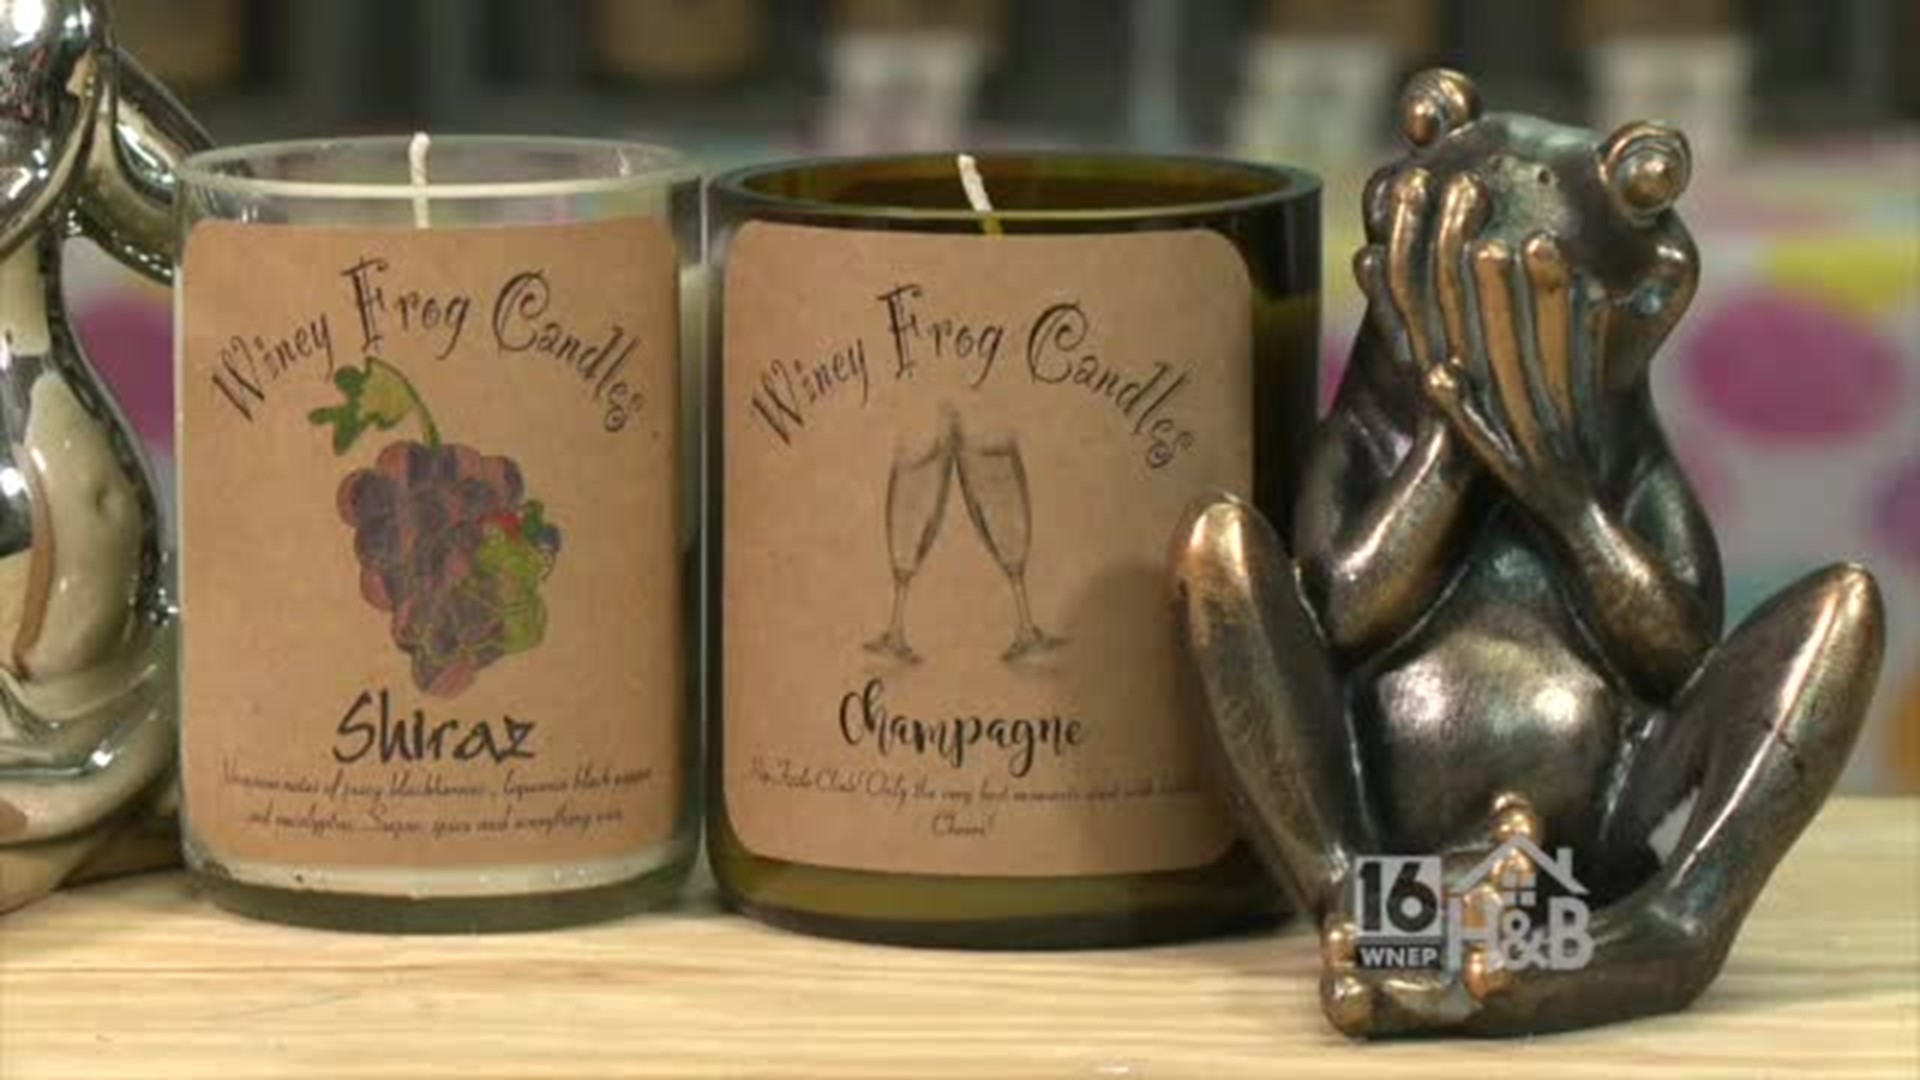 Winey Frog Candles